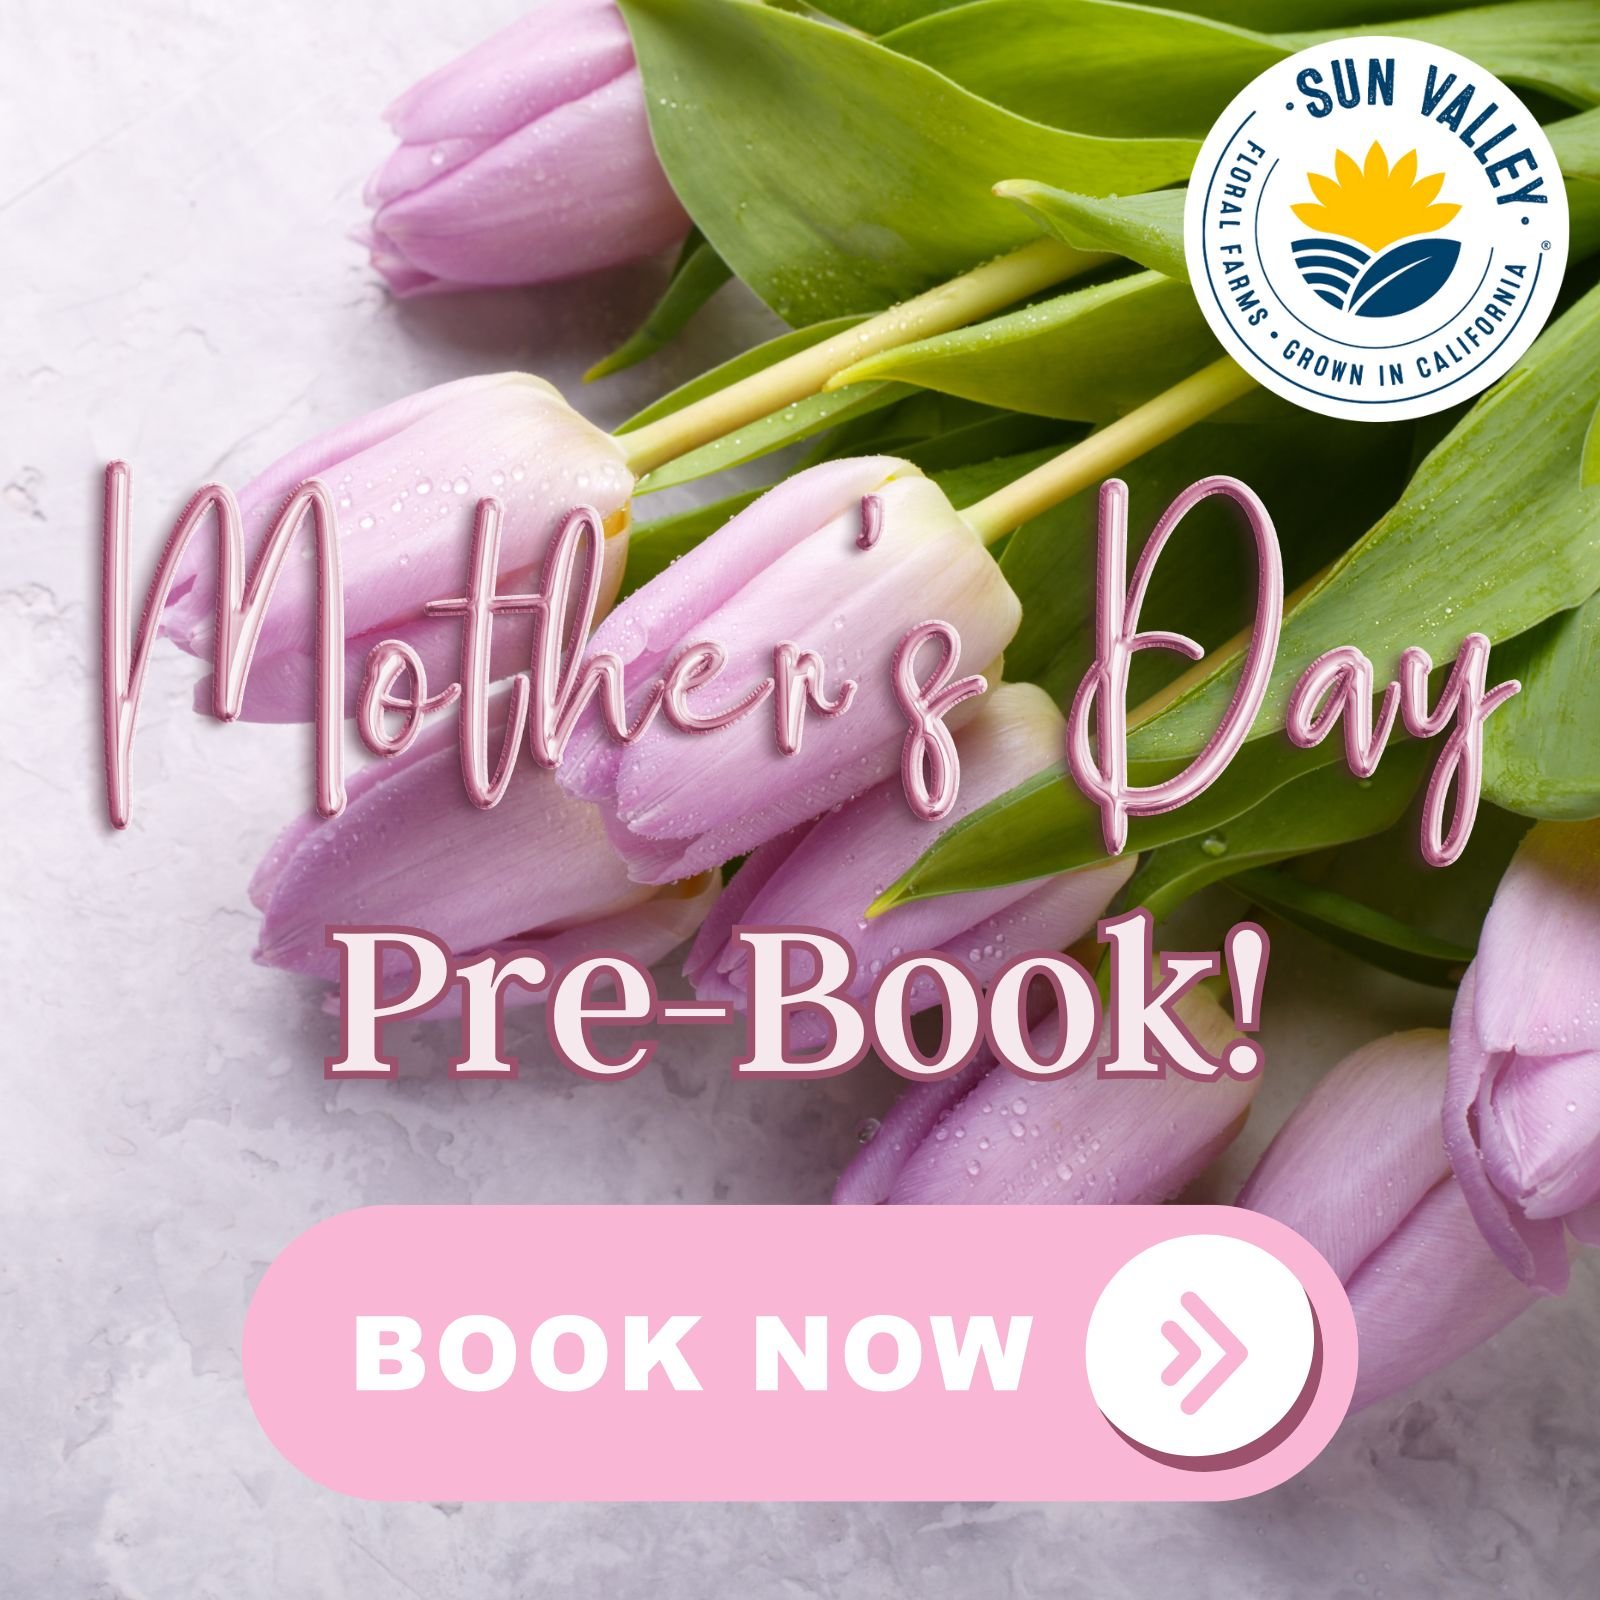 Mother's Day Pre-Book is ending soon! We have all your favorite butterflies, tulips, lilies and much more available to pre-order before largest floral holiday of the year.

Take the stress out of ordering for Mother's Day by calling your favorite Sun